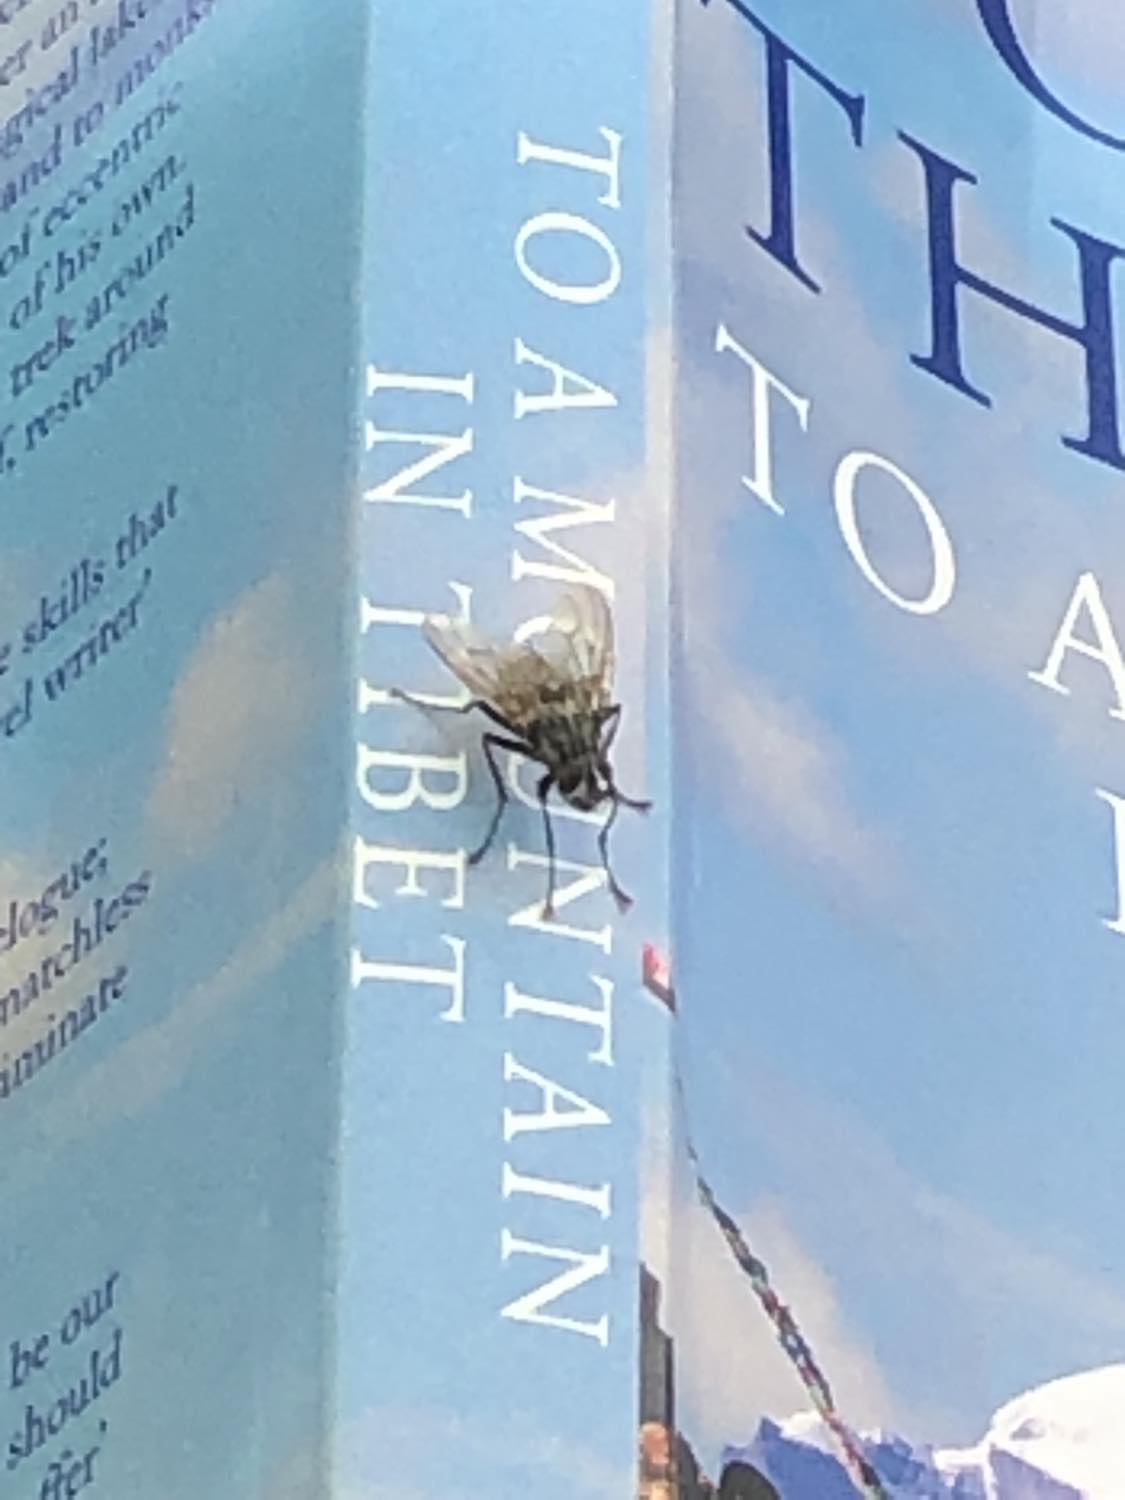 A much closer view of our fly friend, this time sitting on the binding of the book, again overtop of the word mountain lol. He's facing somewhat towards me and to the right, but appears to be looking generally forward and not at me specifically.